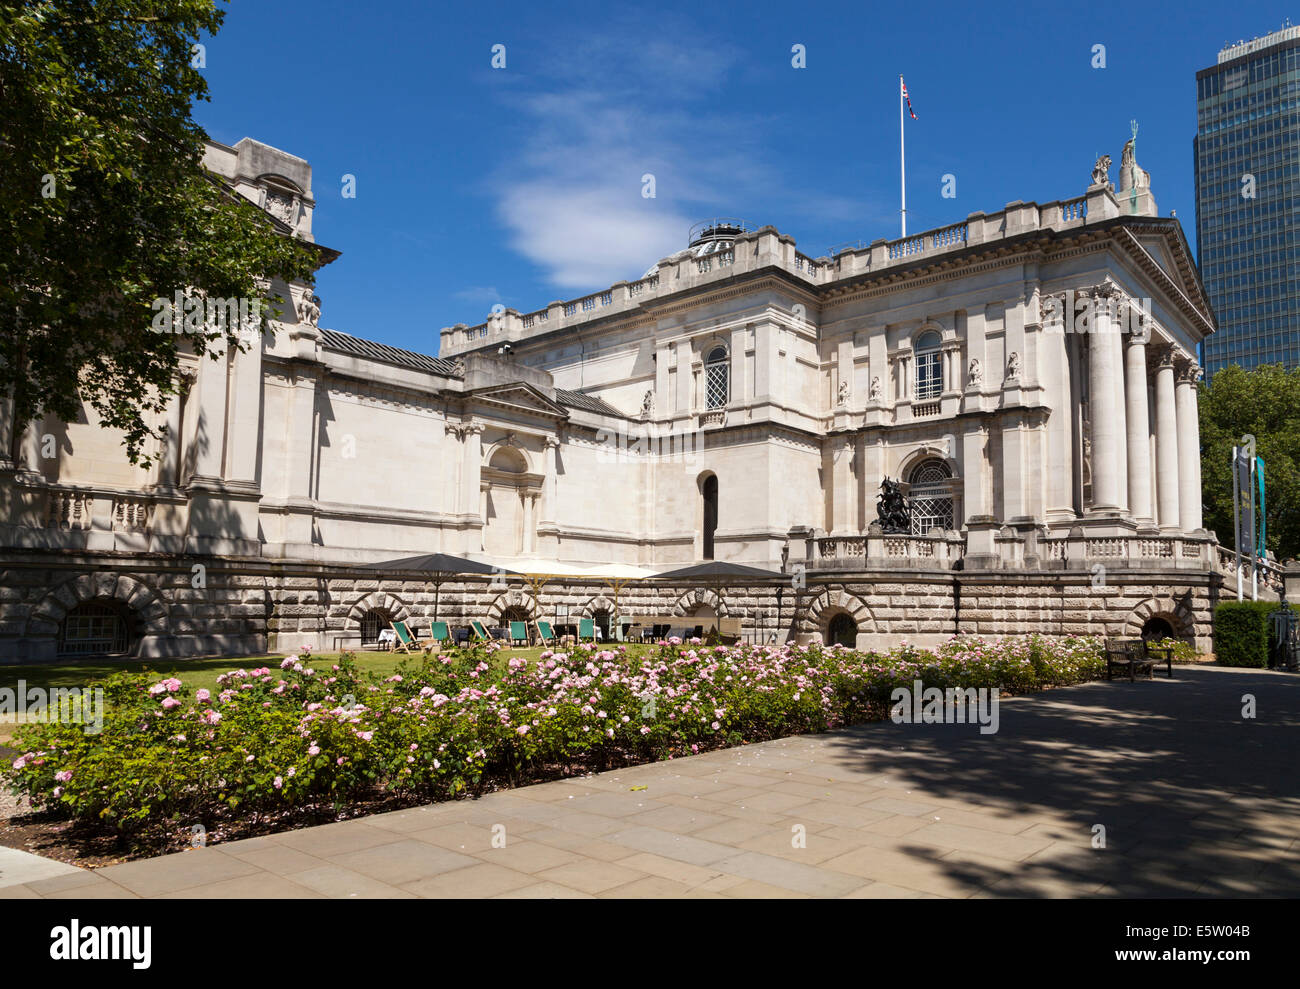 Exterior of the Tate Britain art gallery in Millbank, Westminster on a bright, sunny day Stock Photo